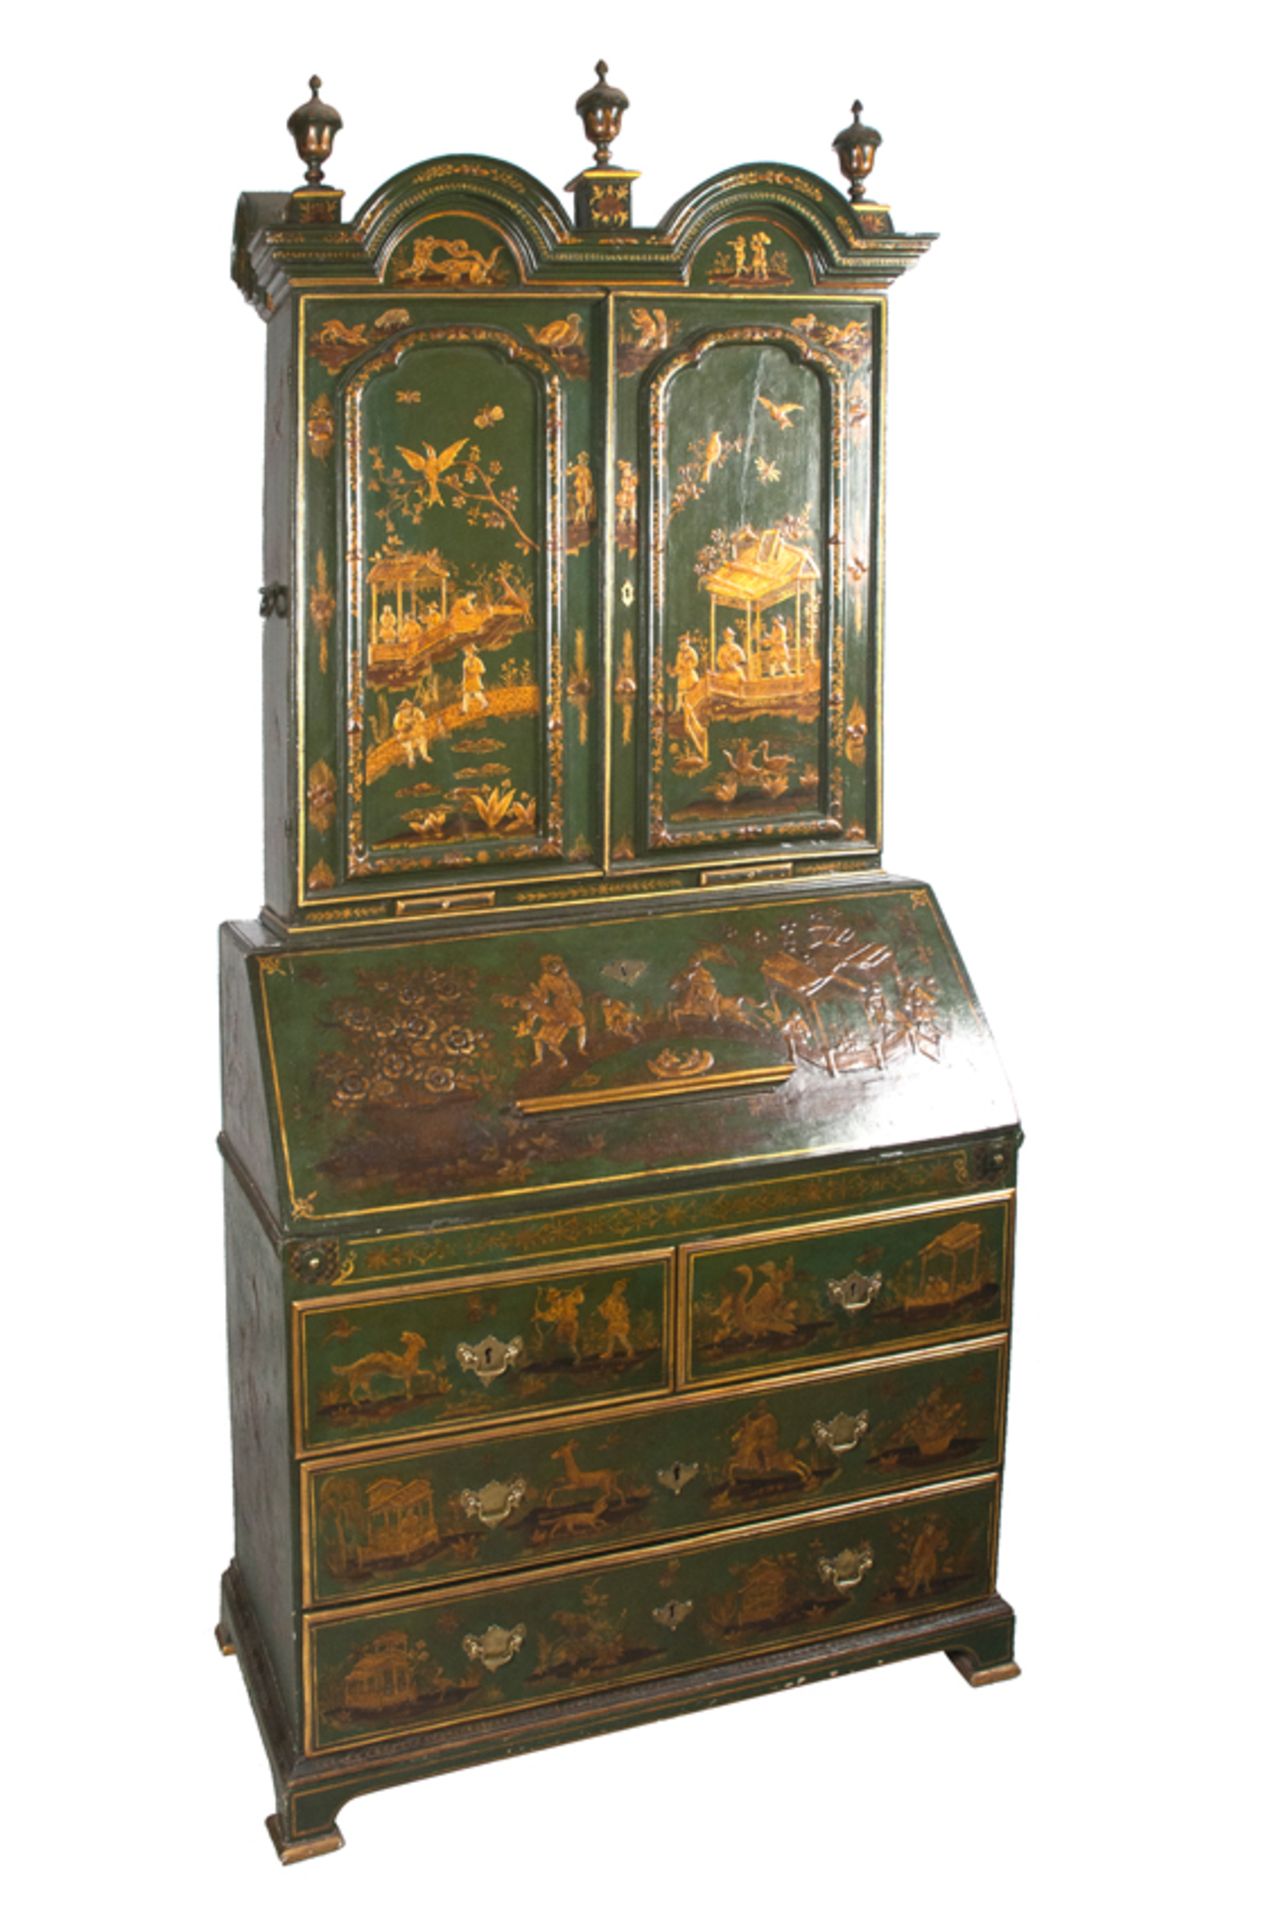 Carved, lacquered and gilded wooden cabinet with Chinese-style decoration England. 19th century. - Bild 2 aus 11